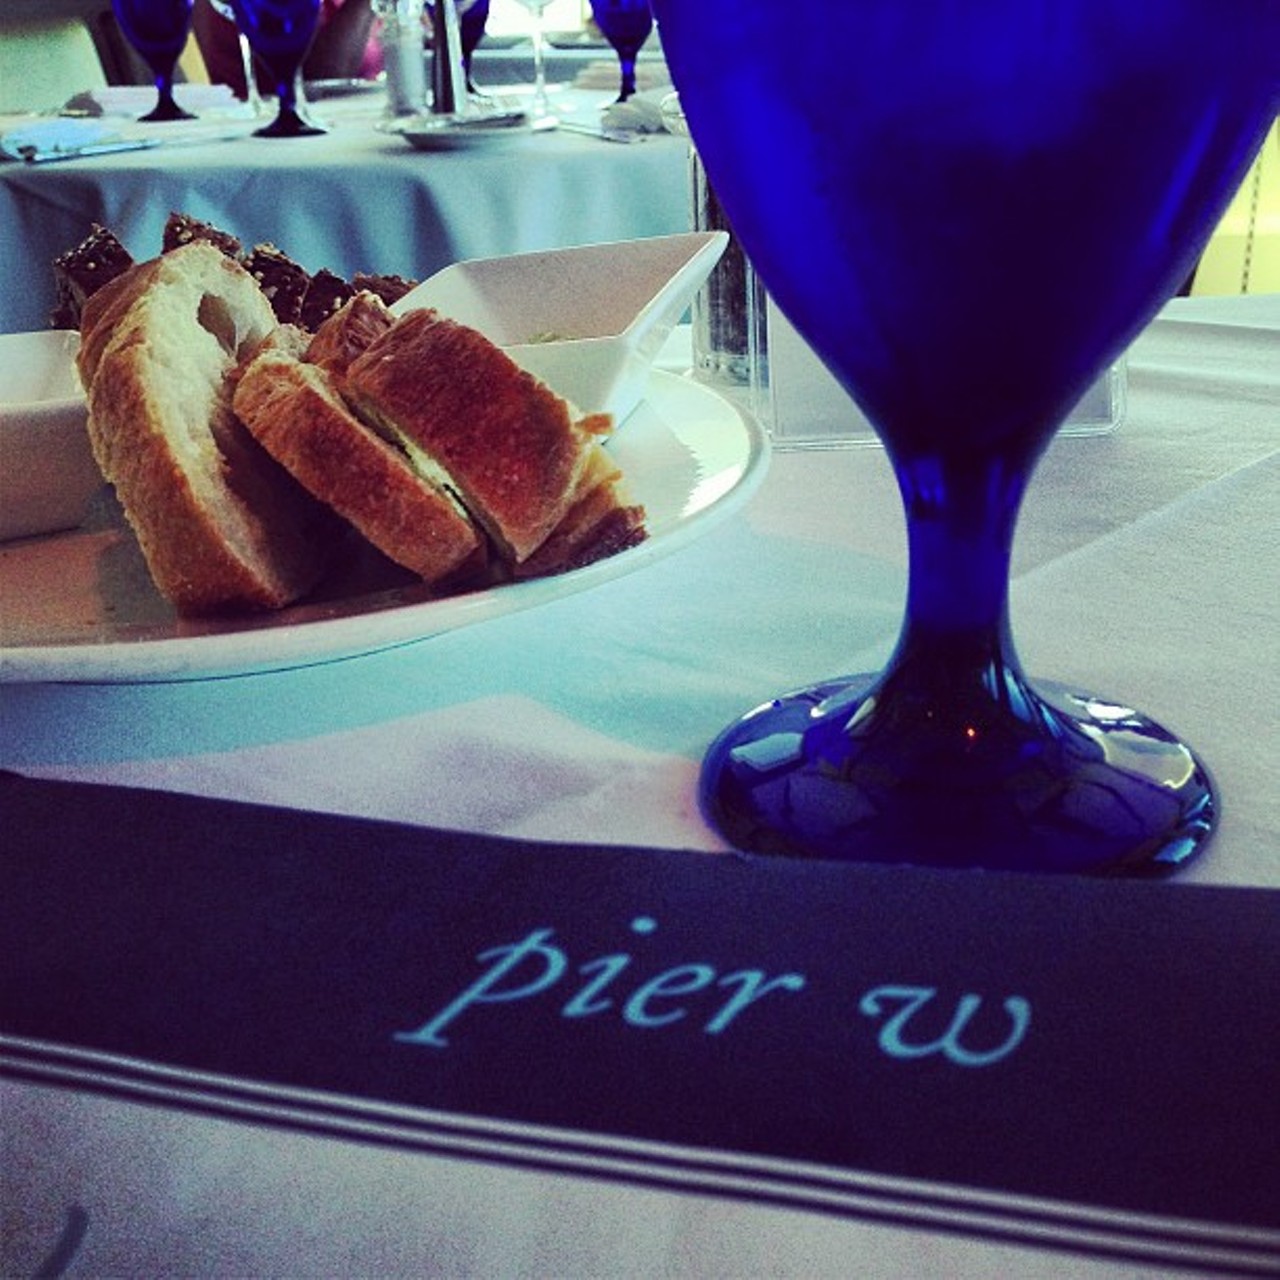 Pier W's Grand Brunch Buffet is one of the most elegant brunches in Northeast Ohio. The stars of the show are the carving stations with roast leg of lamb, and the raw bar with oysters on the half shell. Pier W is located at 12700 Lake Avenue, Lakewood. Call 216-228-2250 or visit selectrestaurants.com for more information.